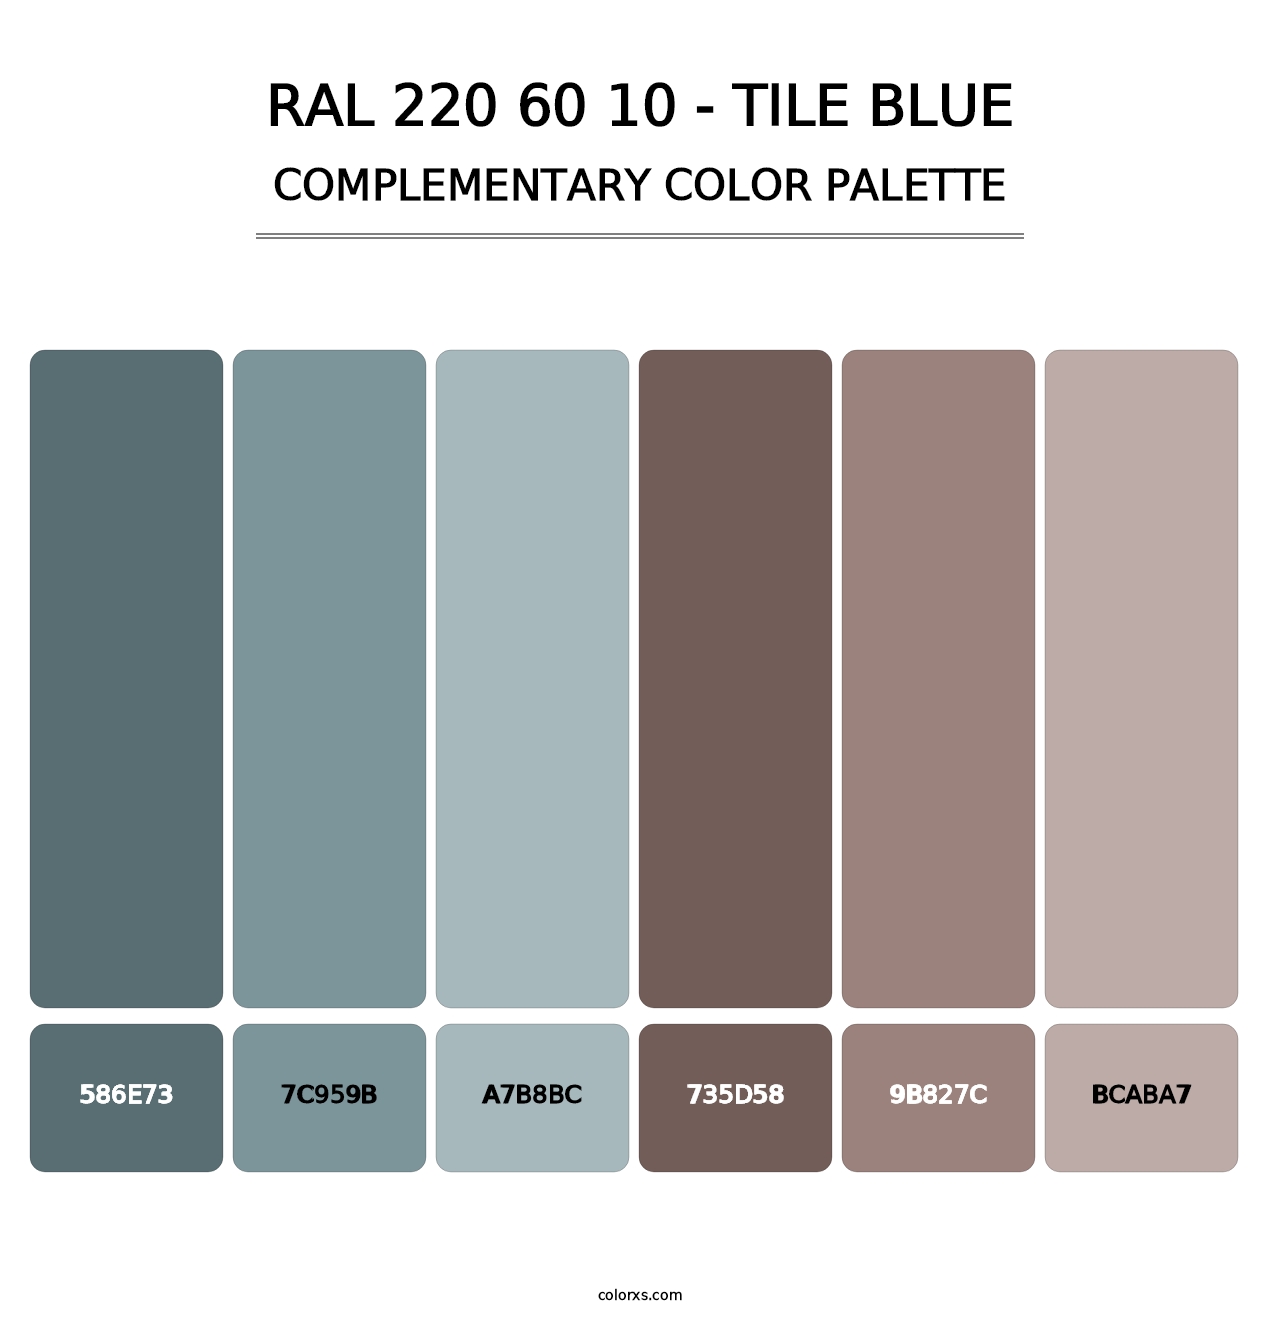 RAL 220 60 10 - Tile Blue - Complementary Color Palette